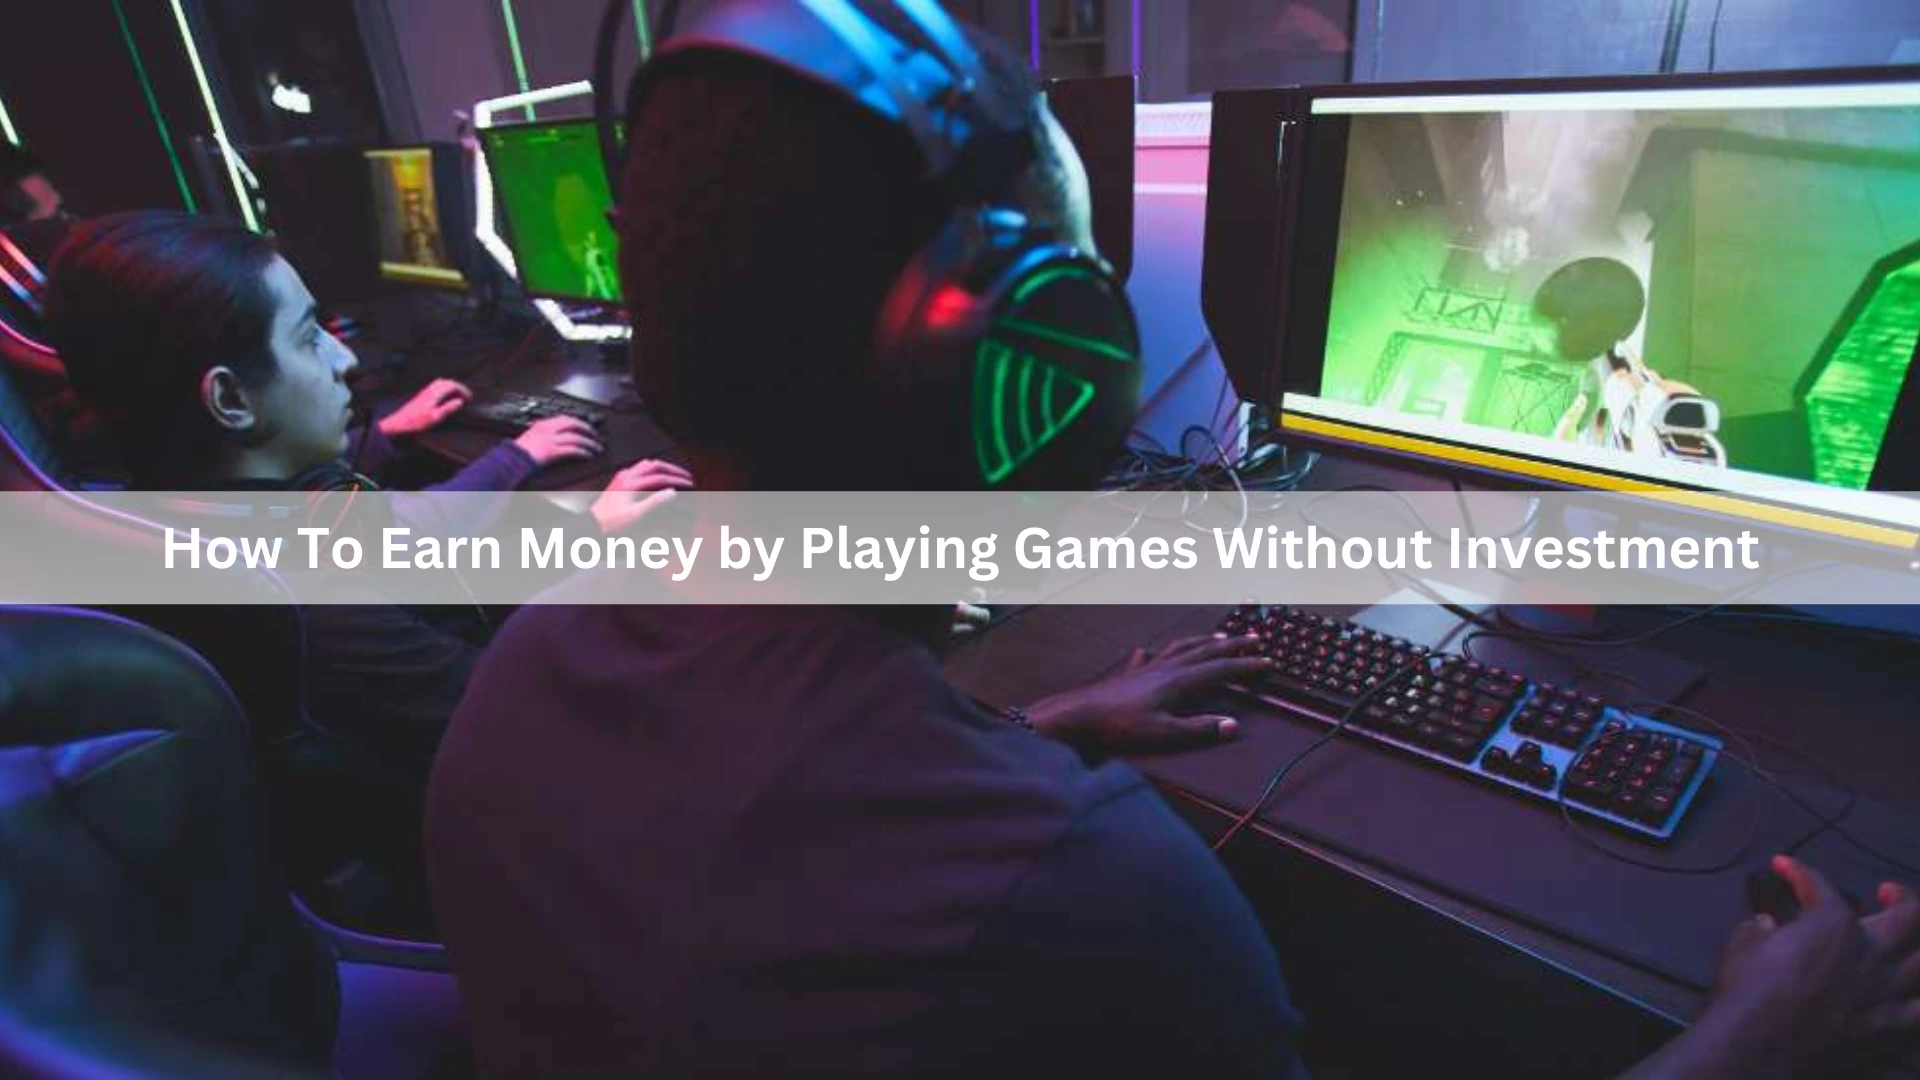 How To Earn Money by Playing Games Without Investment